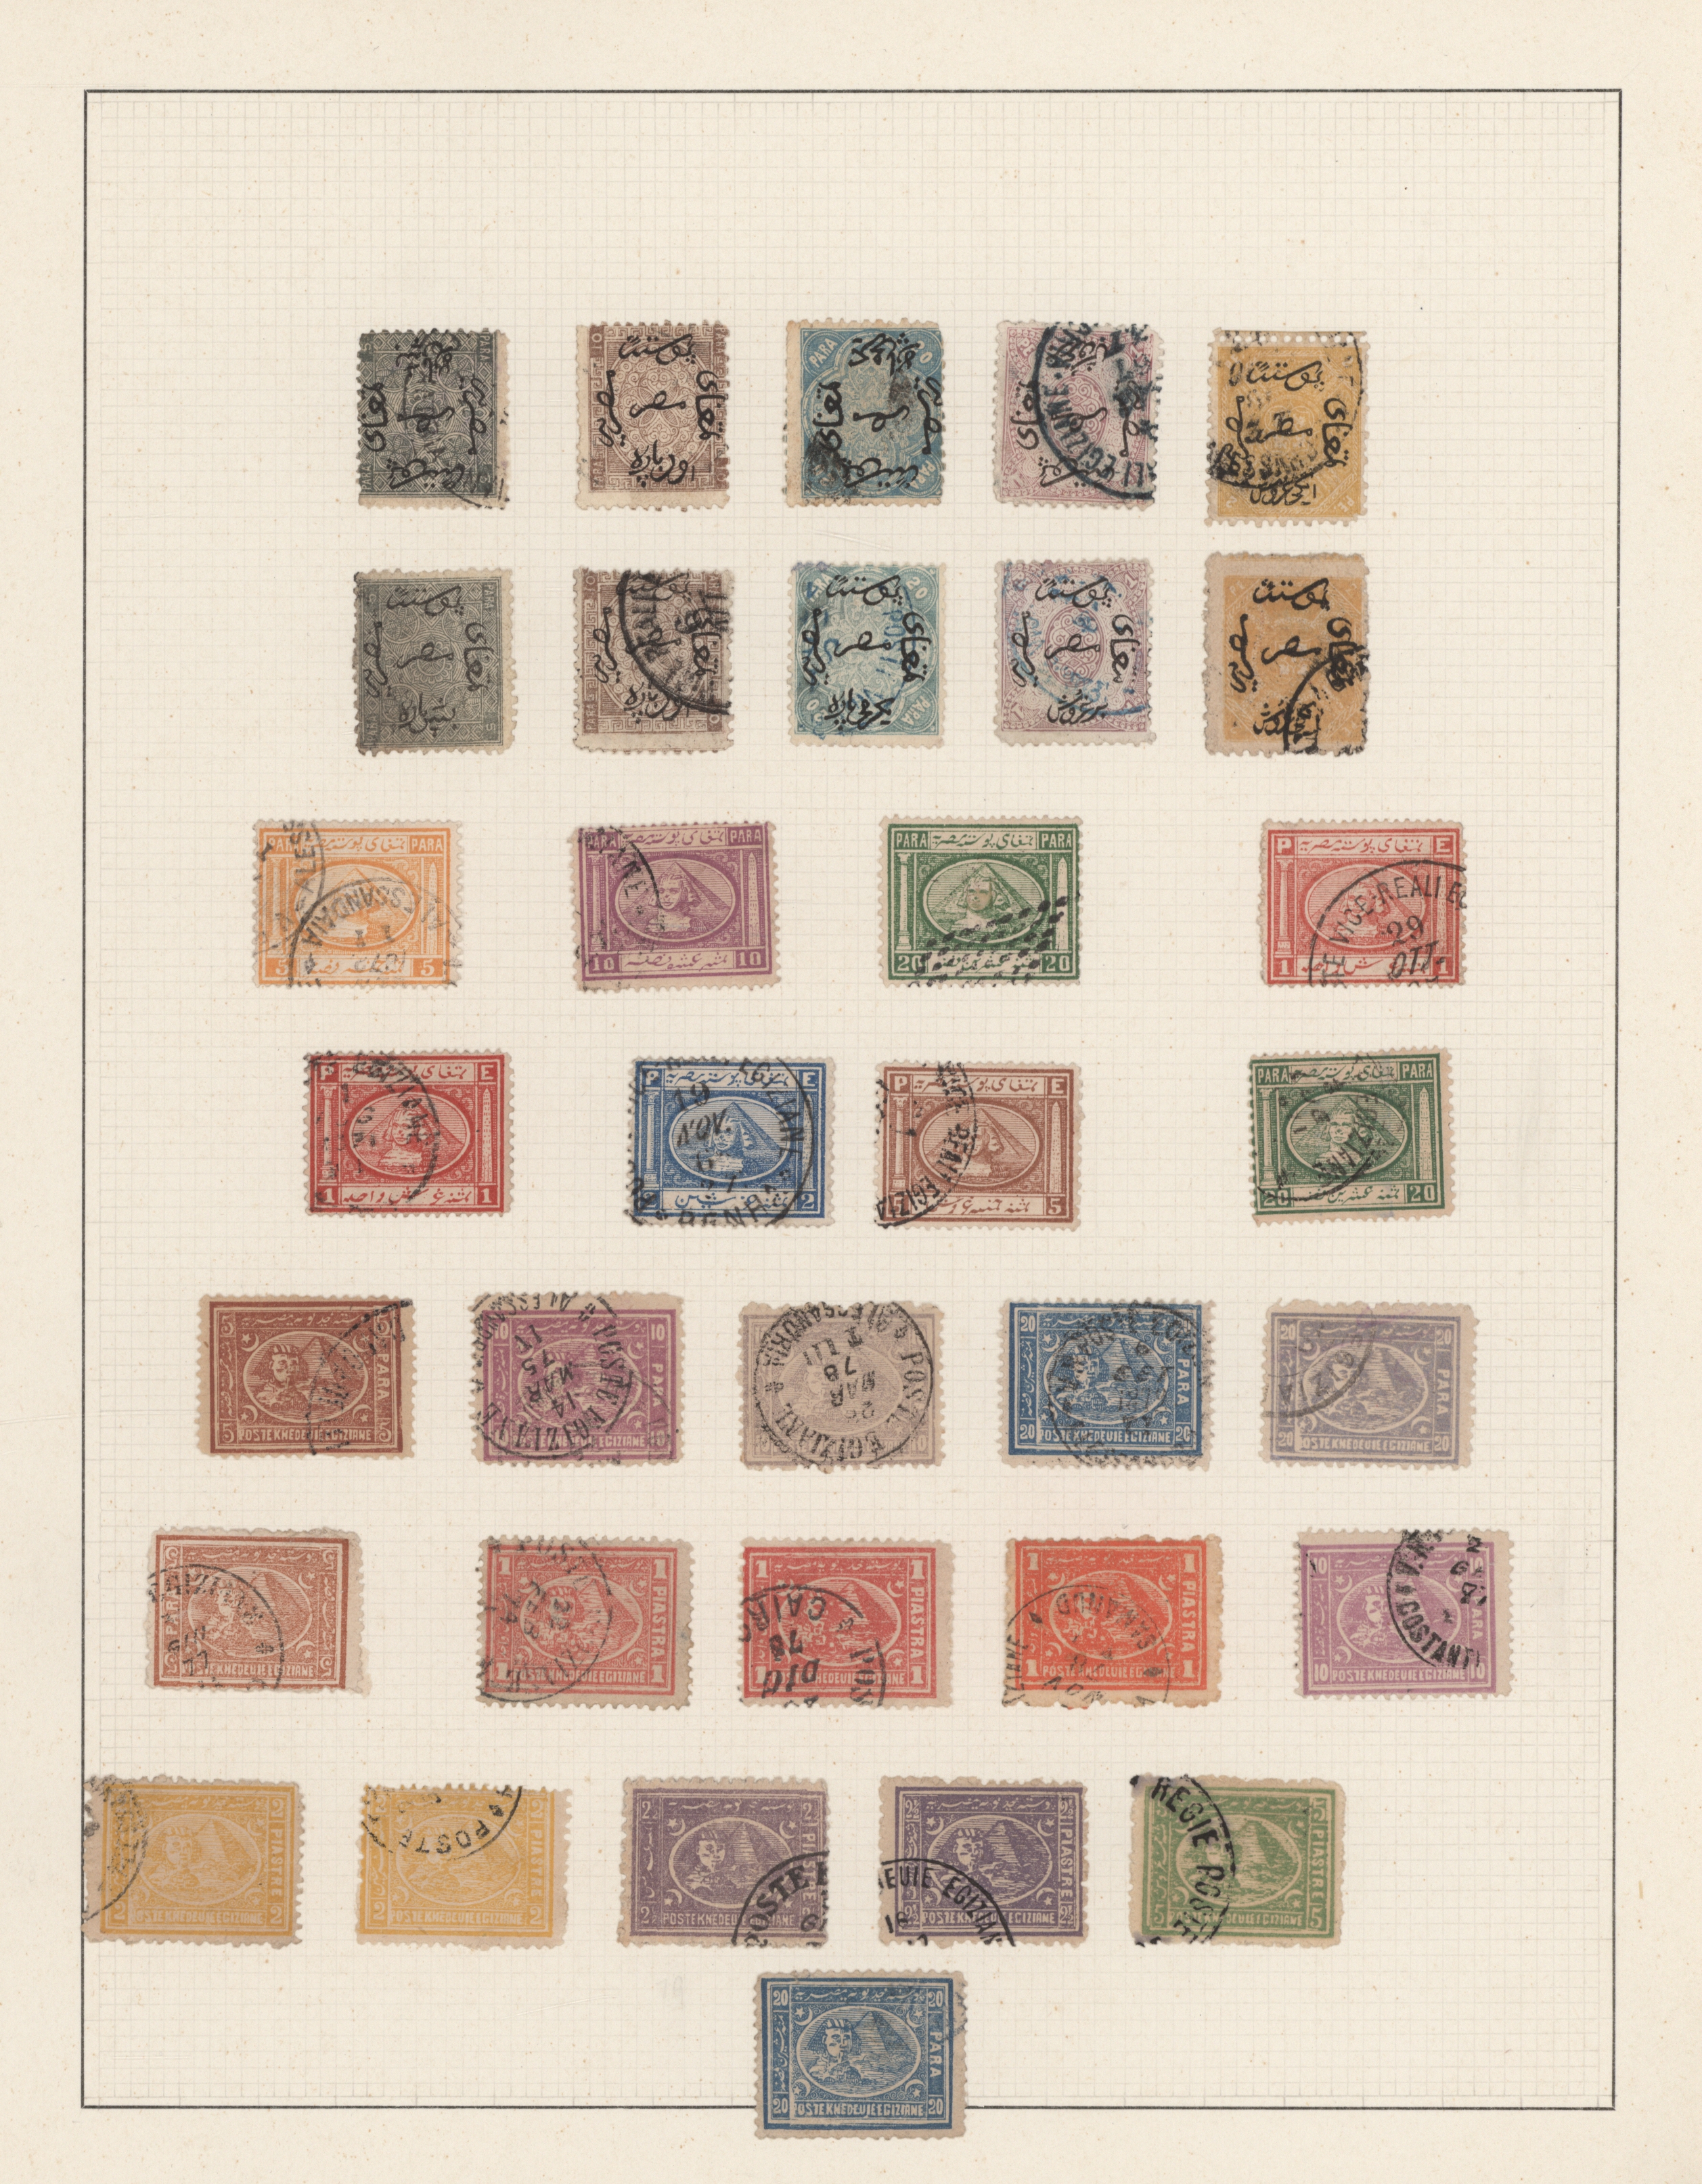 Lot 05013 - ägypten  -  Auktionshaus Christoph Gärtner GmbH & Co. KG 53rd AUCTION - Day 4, Collections Overseas, Air & Shipmail, Thematics, Europe